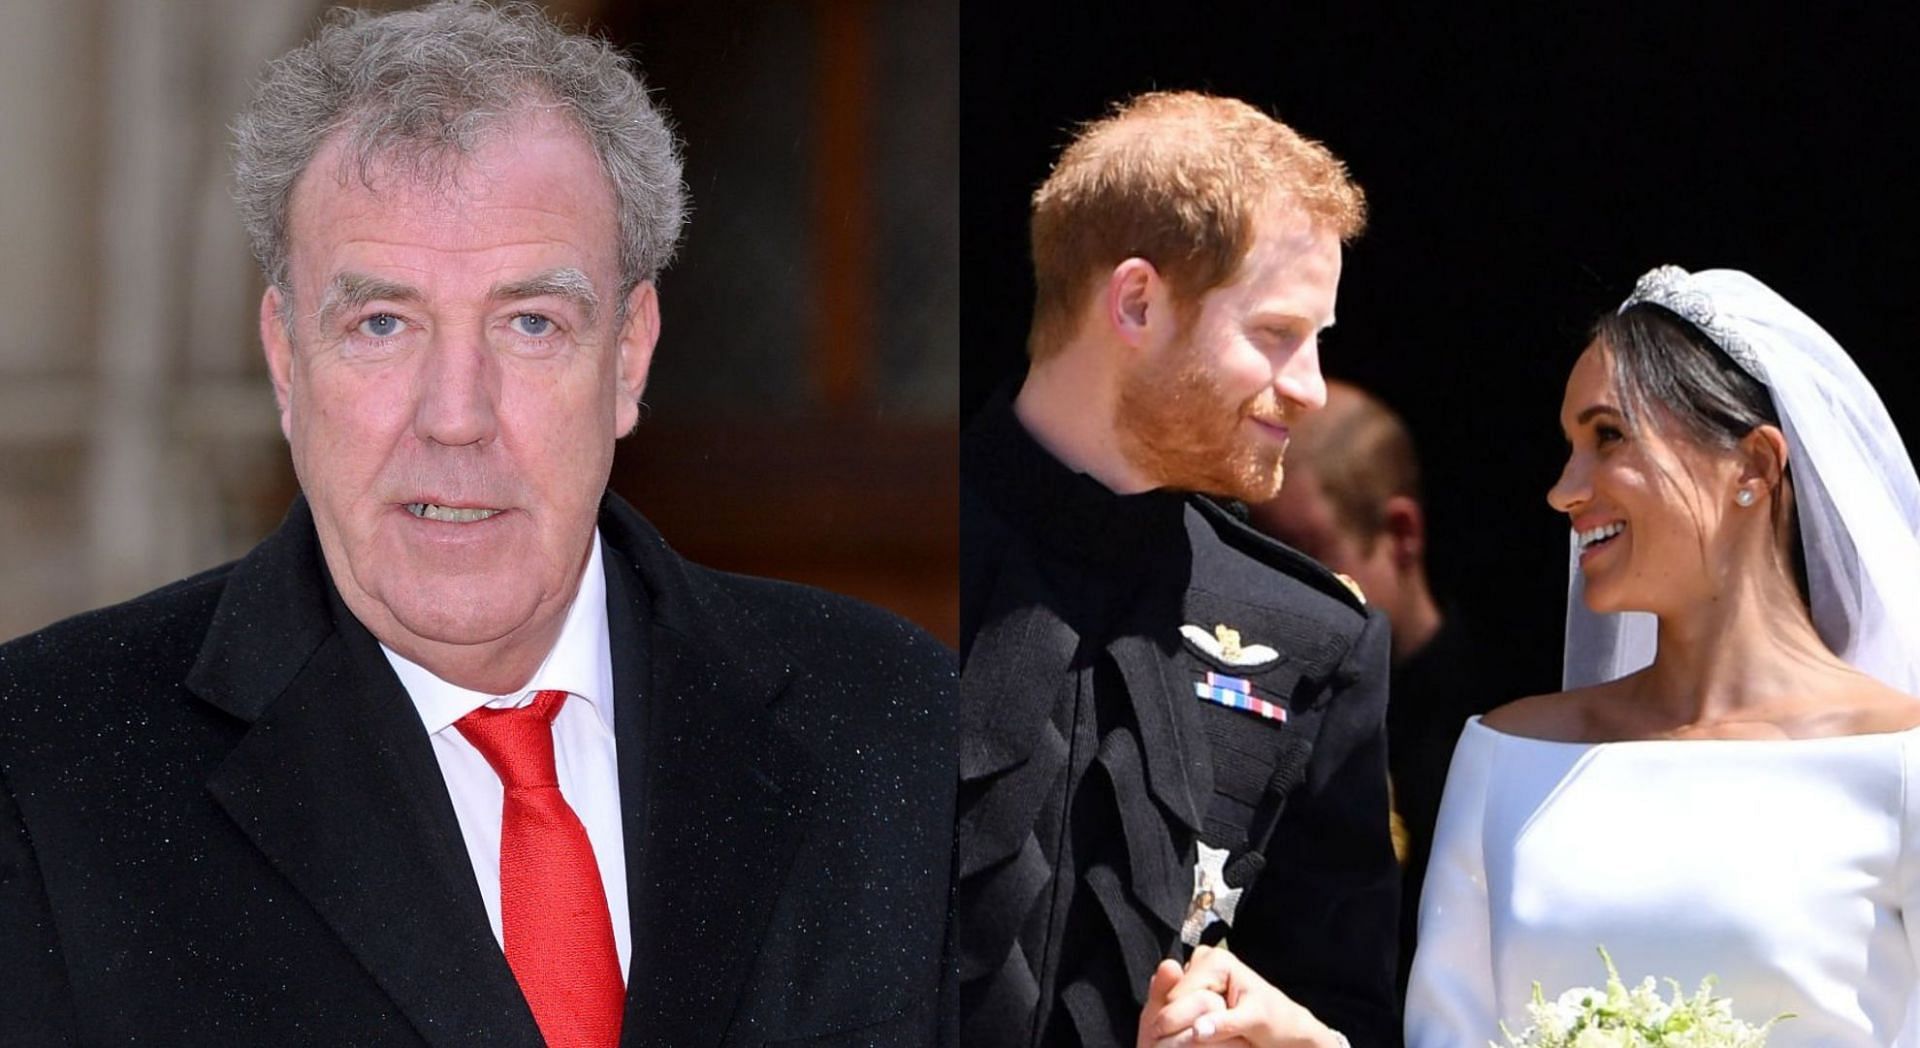 Jeremy Clarkson shared a hateful tirade against Meghan Markle in a recent column (Image via Getty Images)